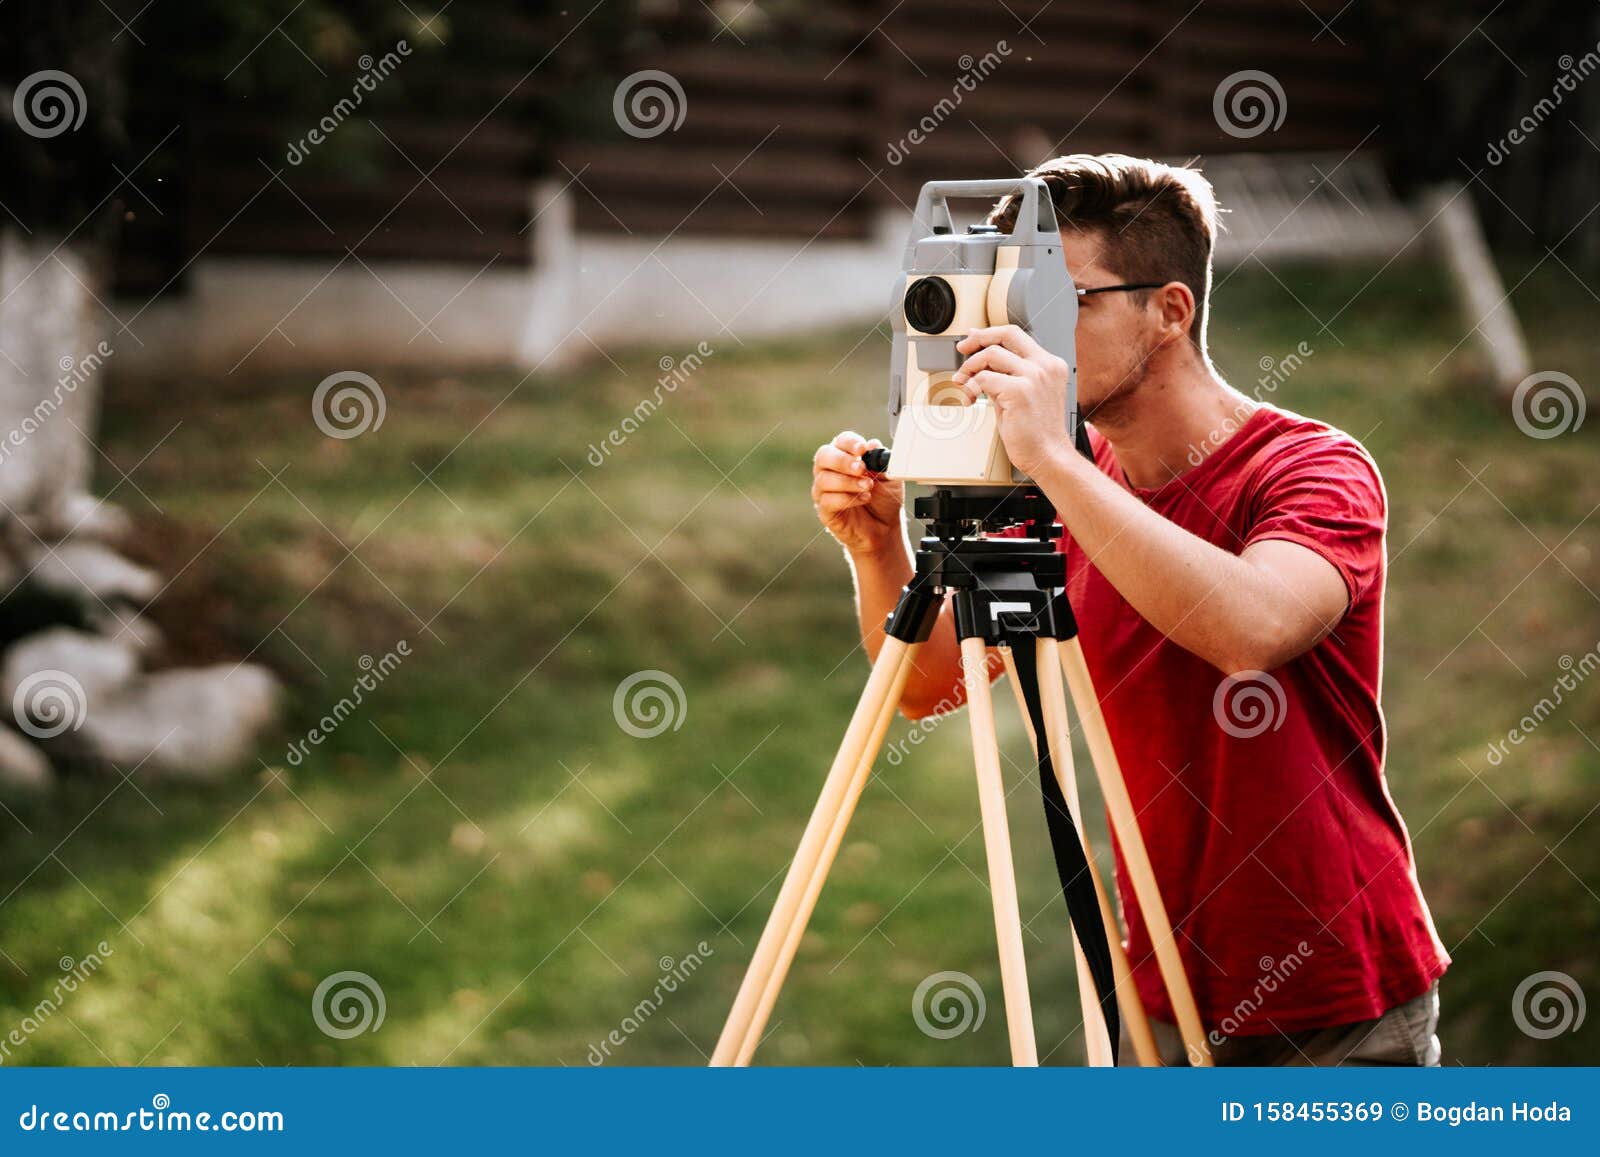 smiling surveyor working with total station with coordinates, cartography industry details